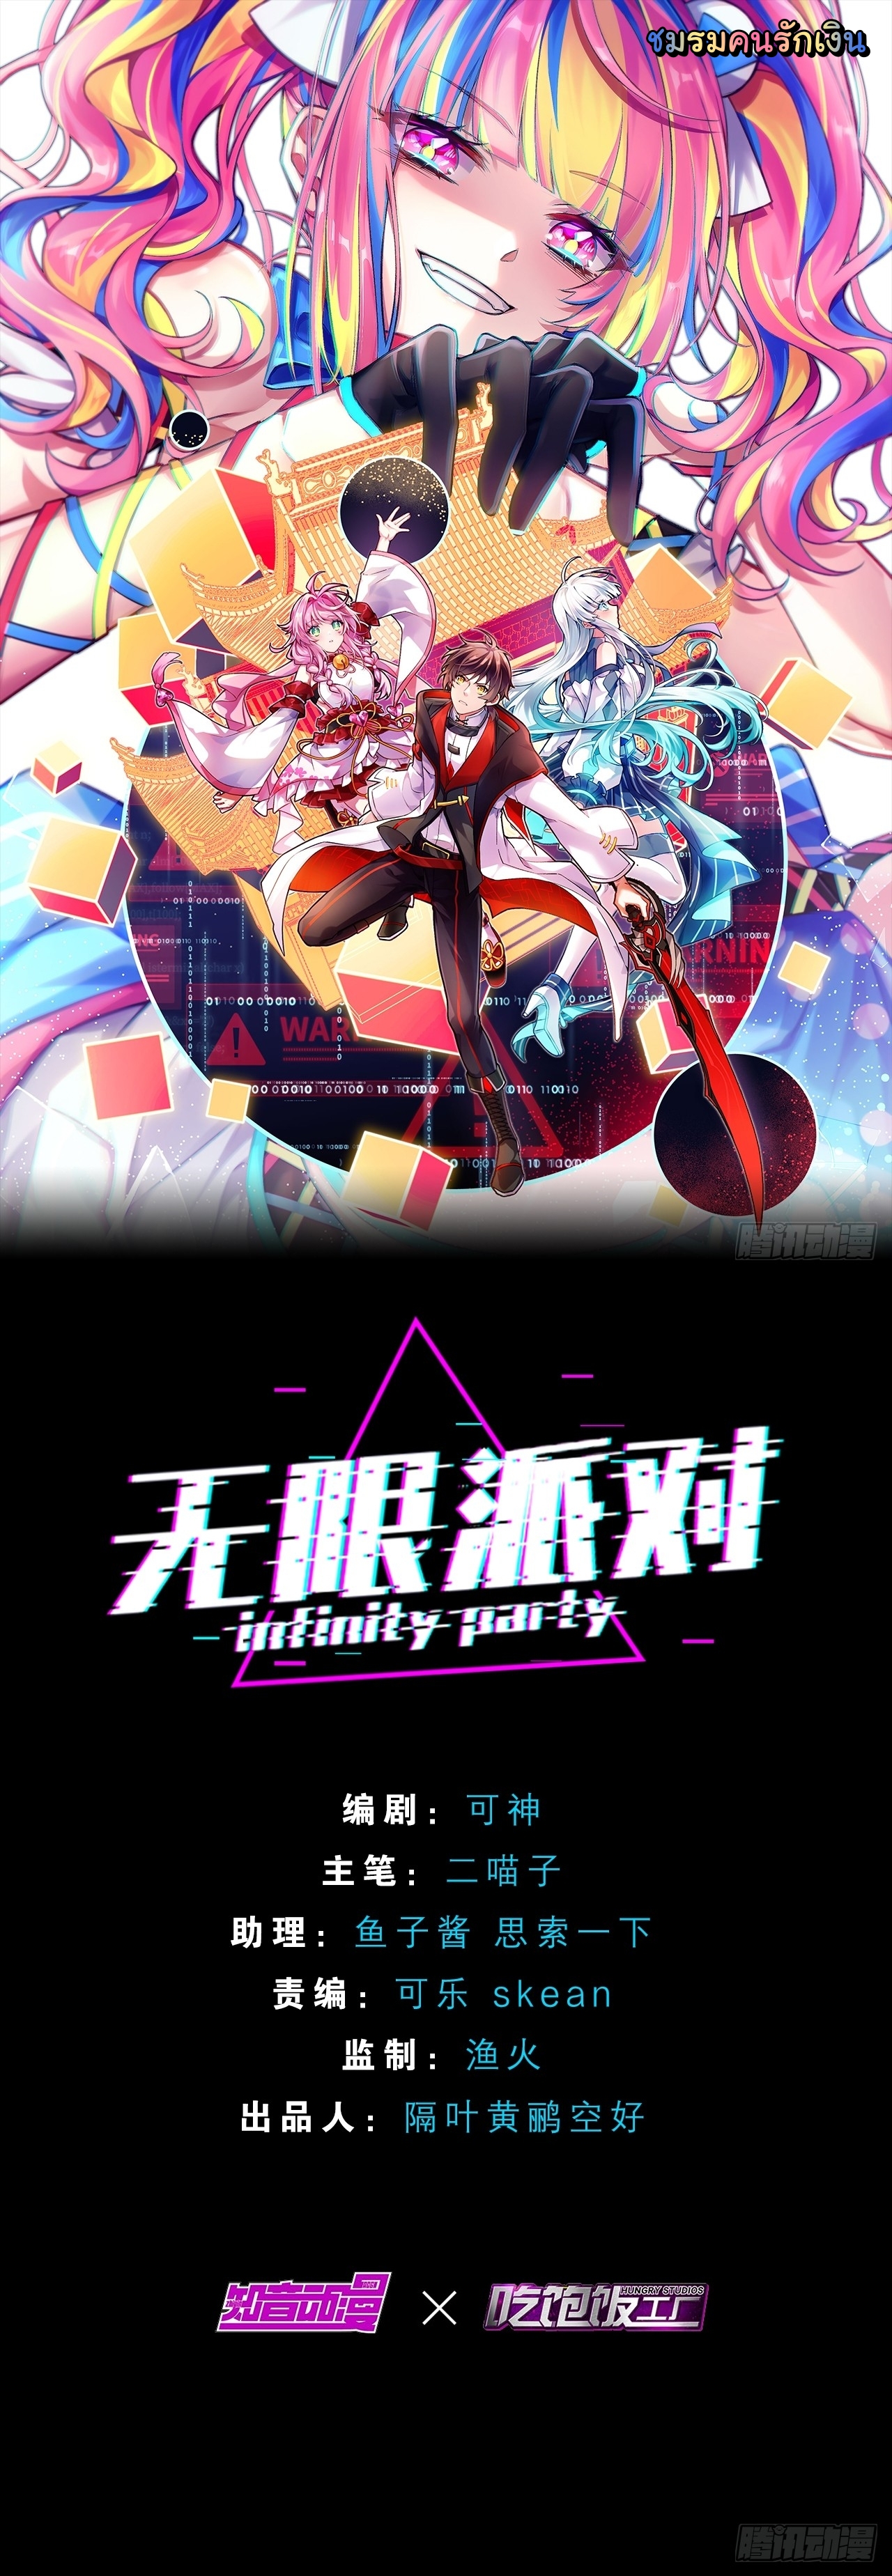 Infinity party 7 (1)